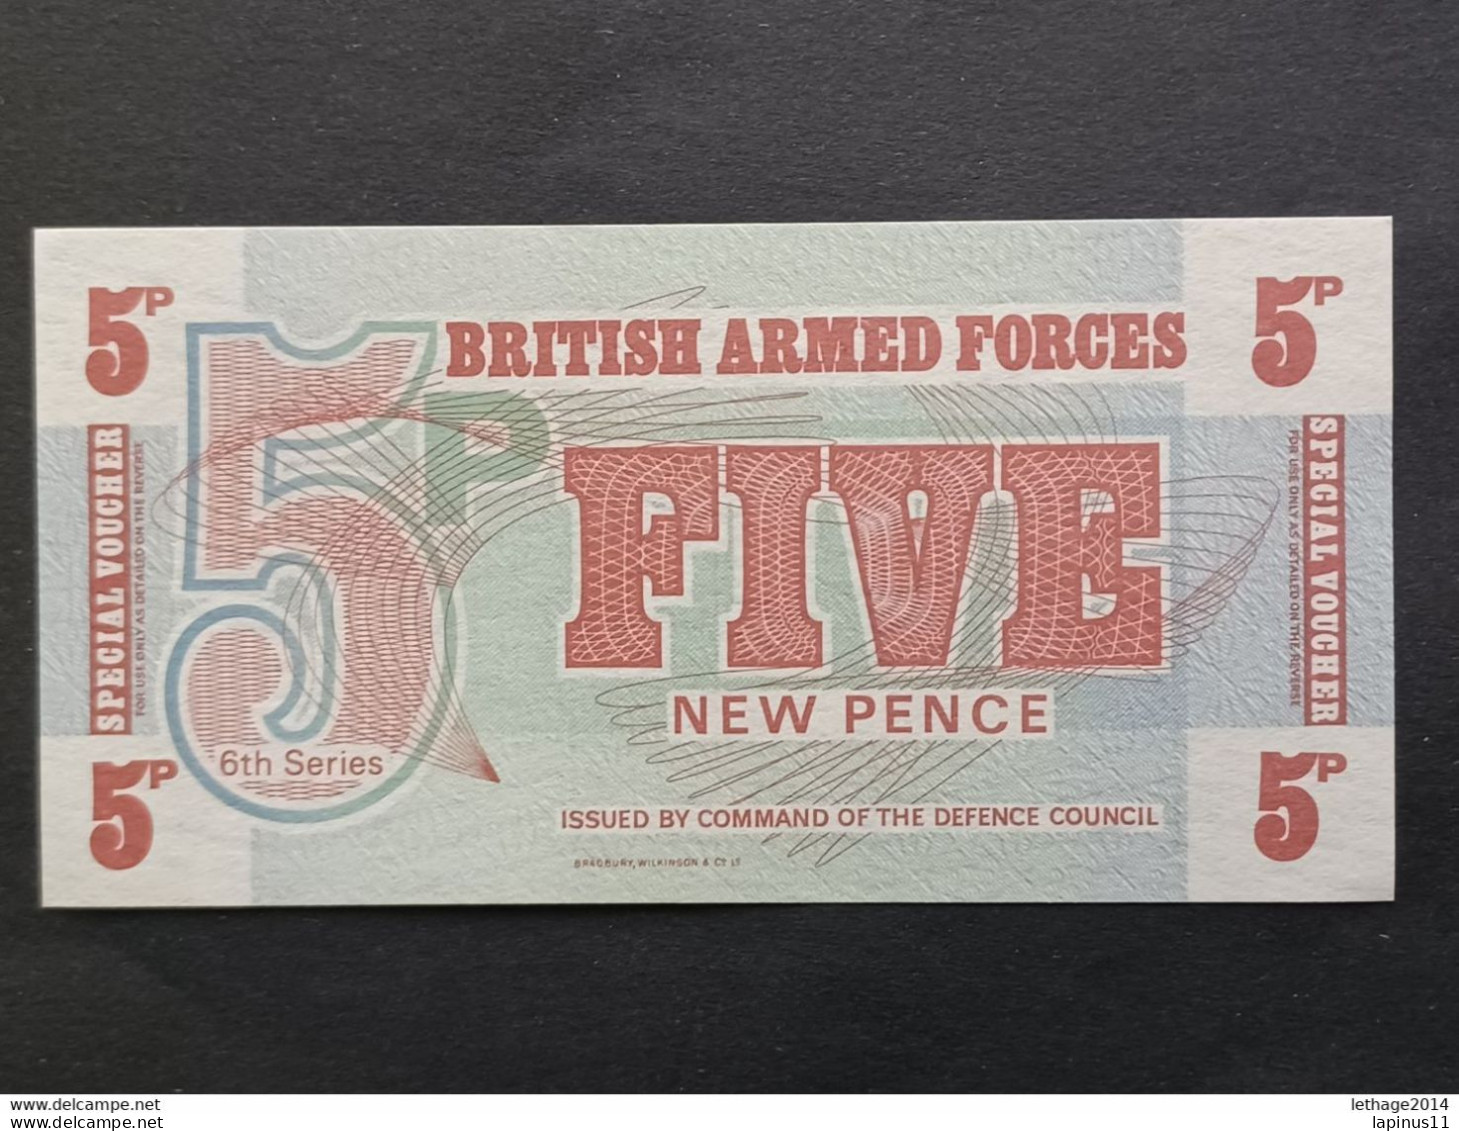 BANKNOTE BRITISH ARMED FORCES 5 PENCE 1945 BRITISH OCCUPATION, GERMANY IN 1945 UNCIRCULATED - British Troepen & Speciale Documenten